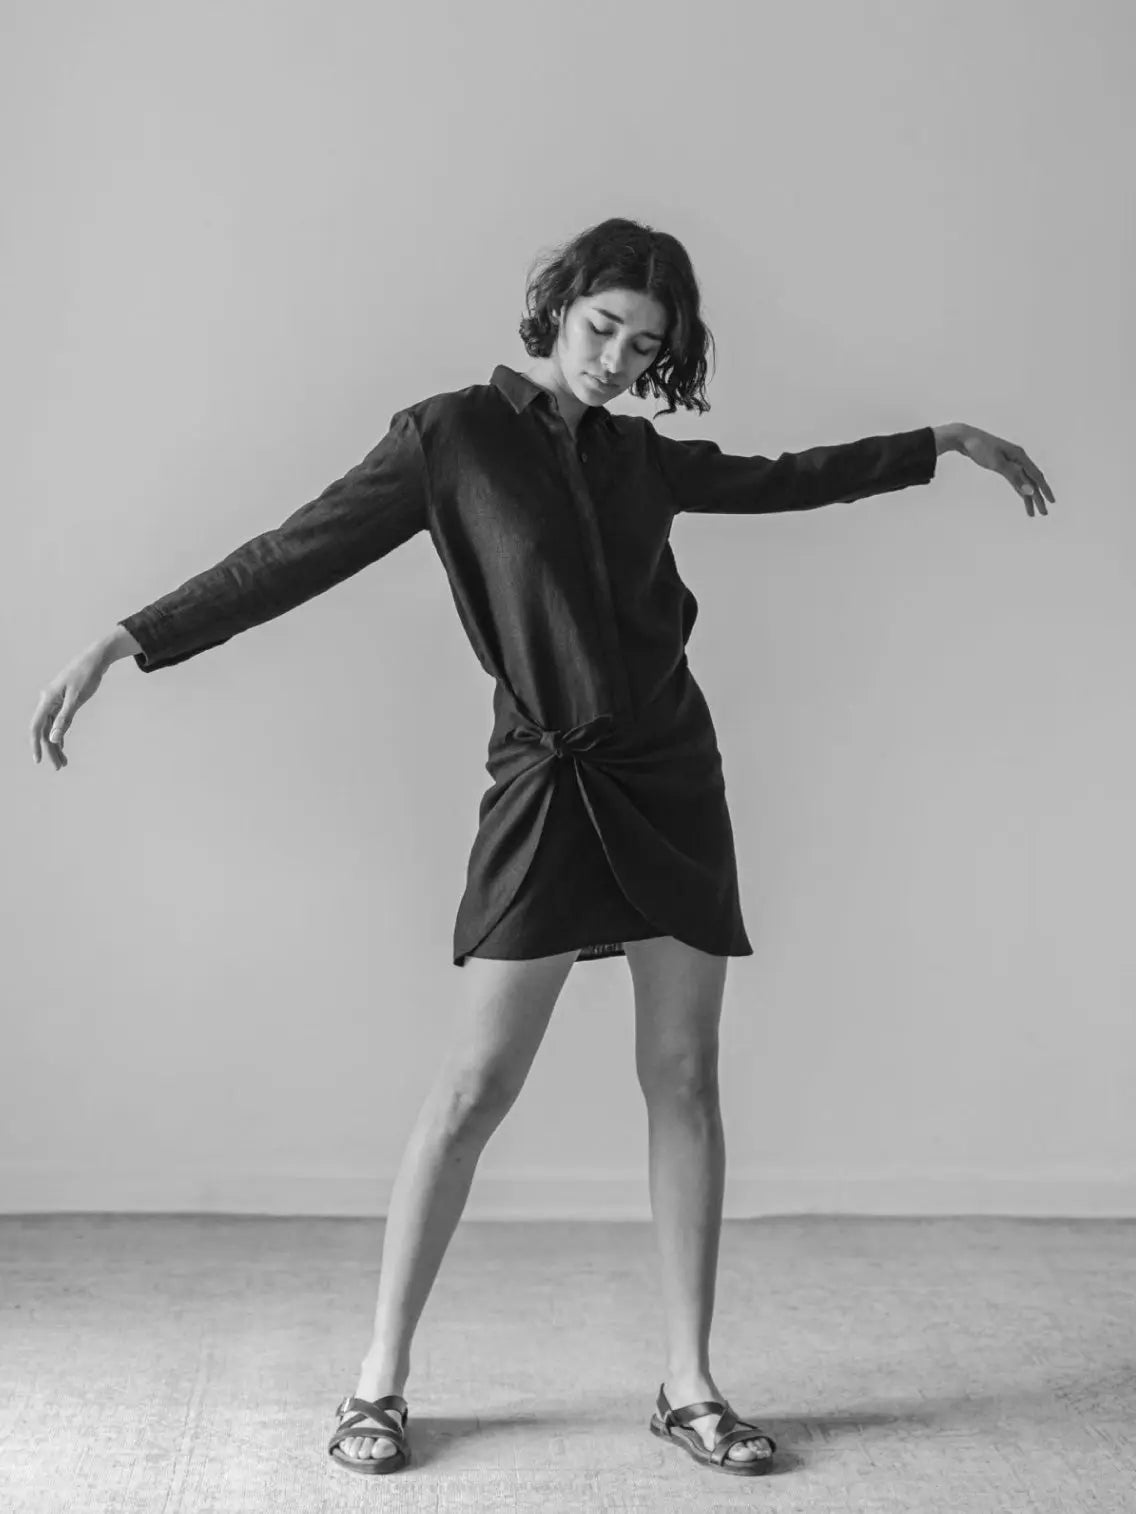 A black and white photo of a person standing on one leg with eyes closed and arms gracefully extended. They are wearing the Vane Longsleeve Dress by Zii Ropa with long sleeves and sandals, embodying an elegance reminiscent of old Barcelona. The background is plain and minimalistic.